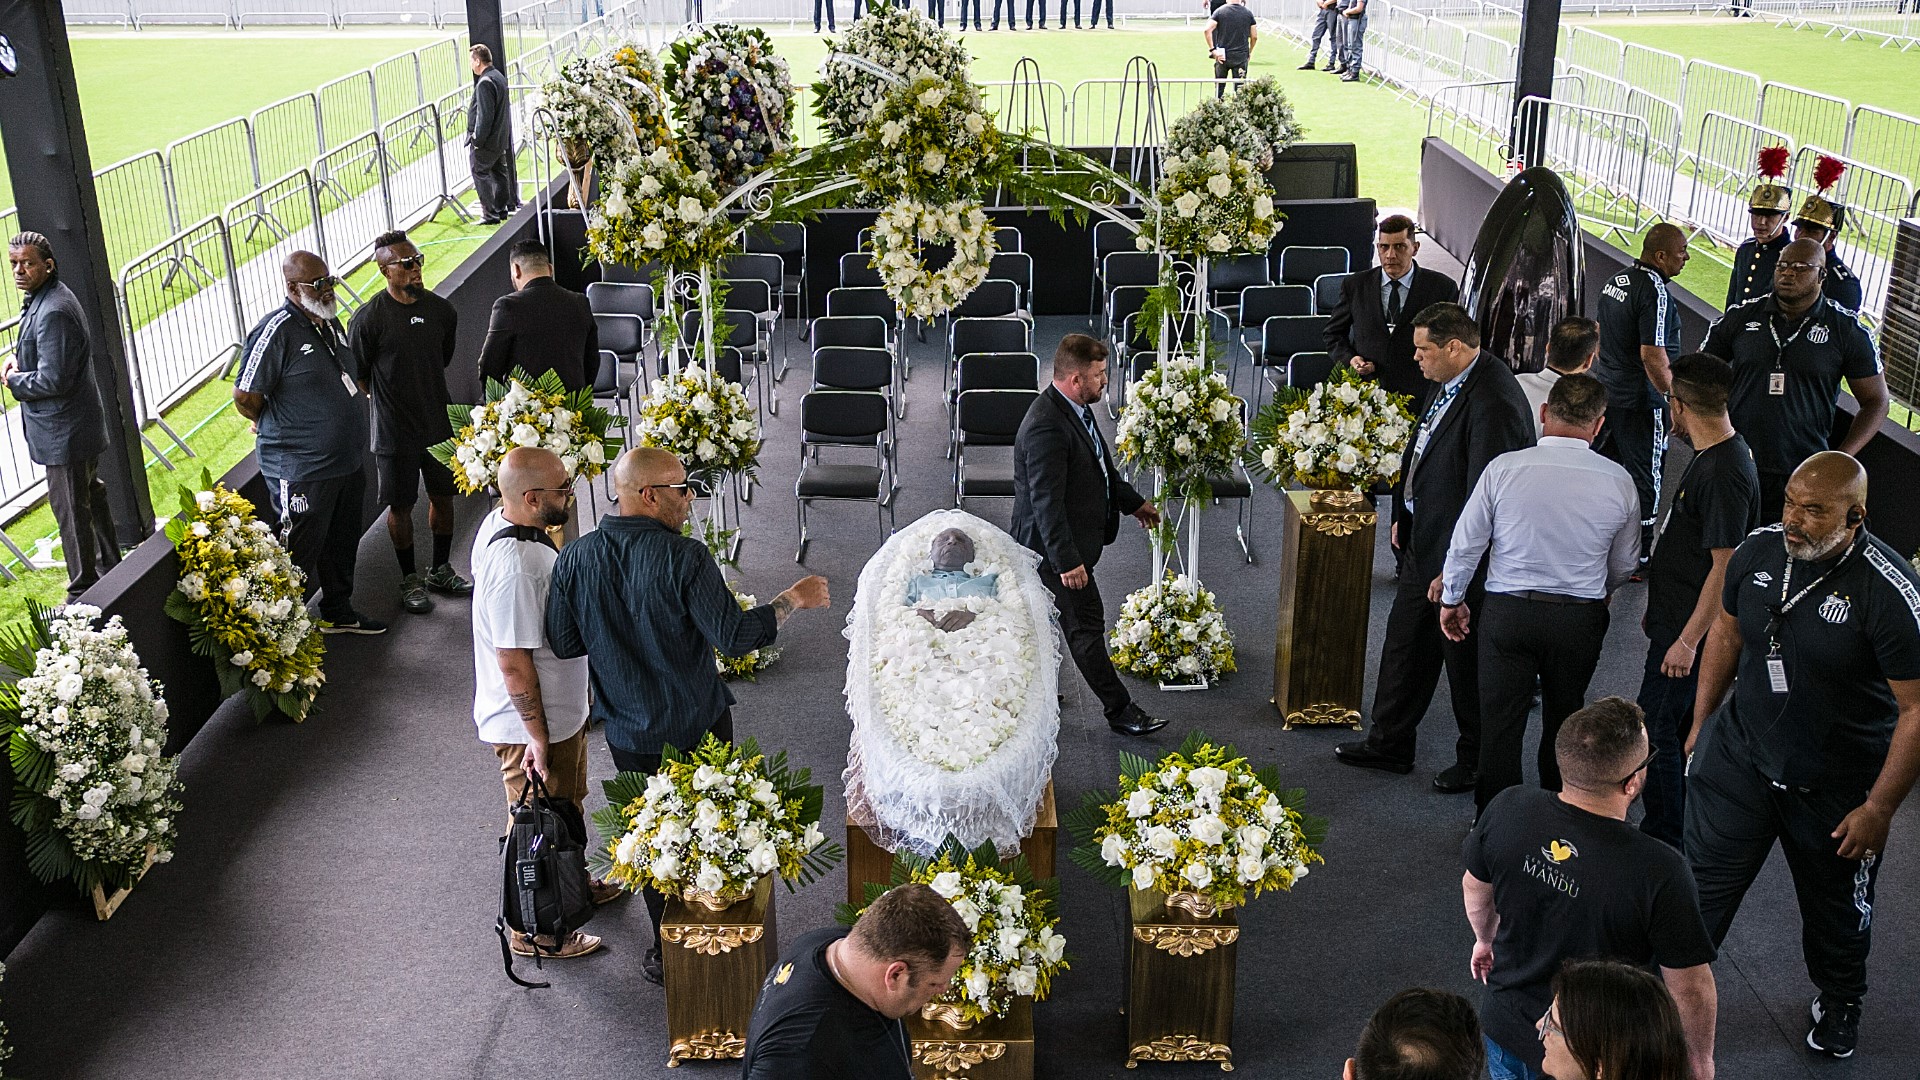 Mourners began paying their respects to Pelé in a solemn procession past his coffin at the Vila Belmiro Stadium in his hometown of Santos.